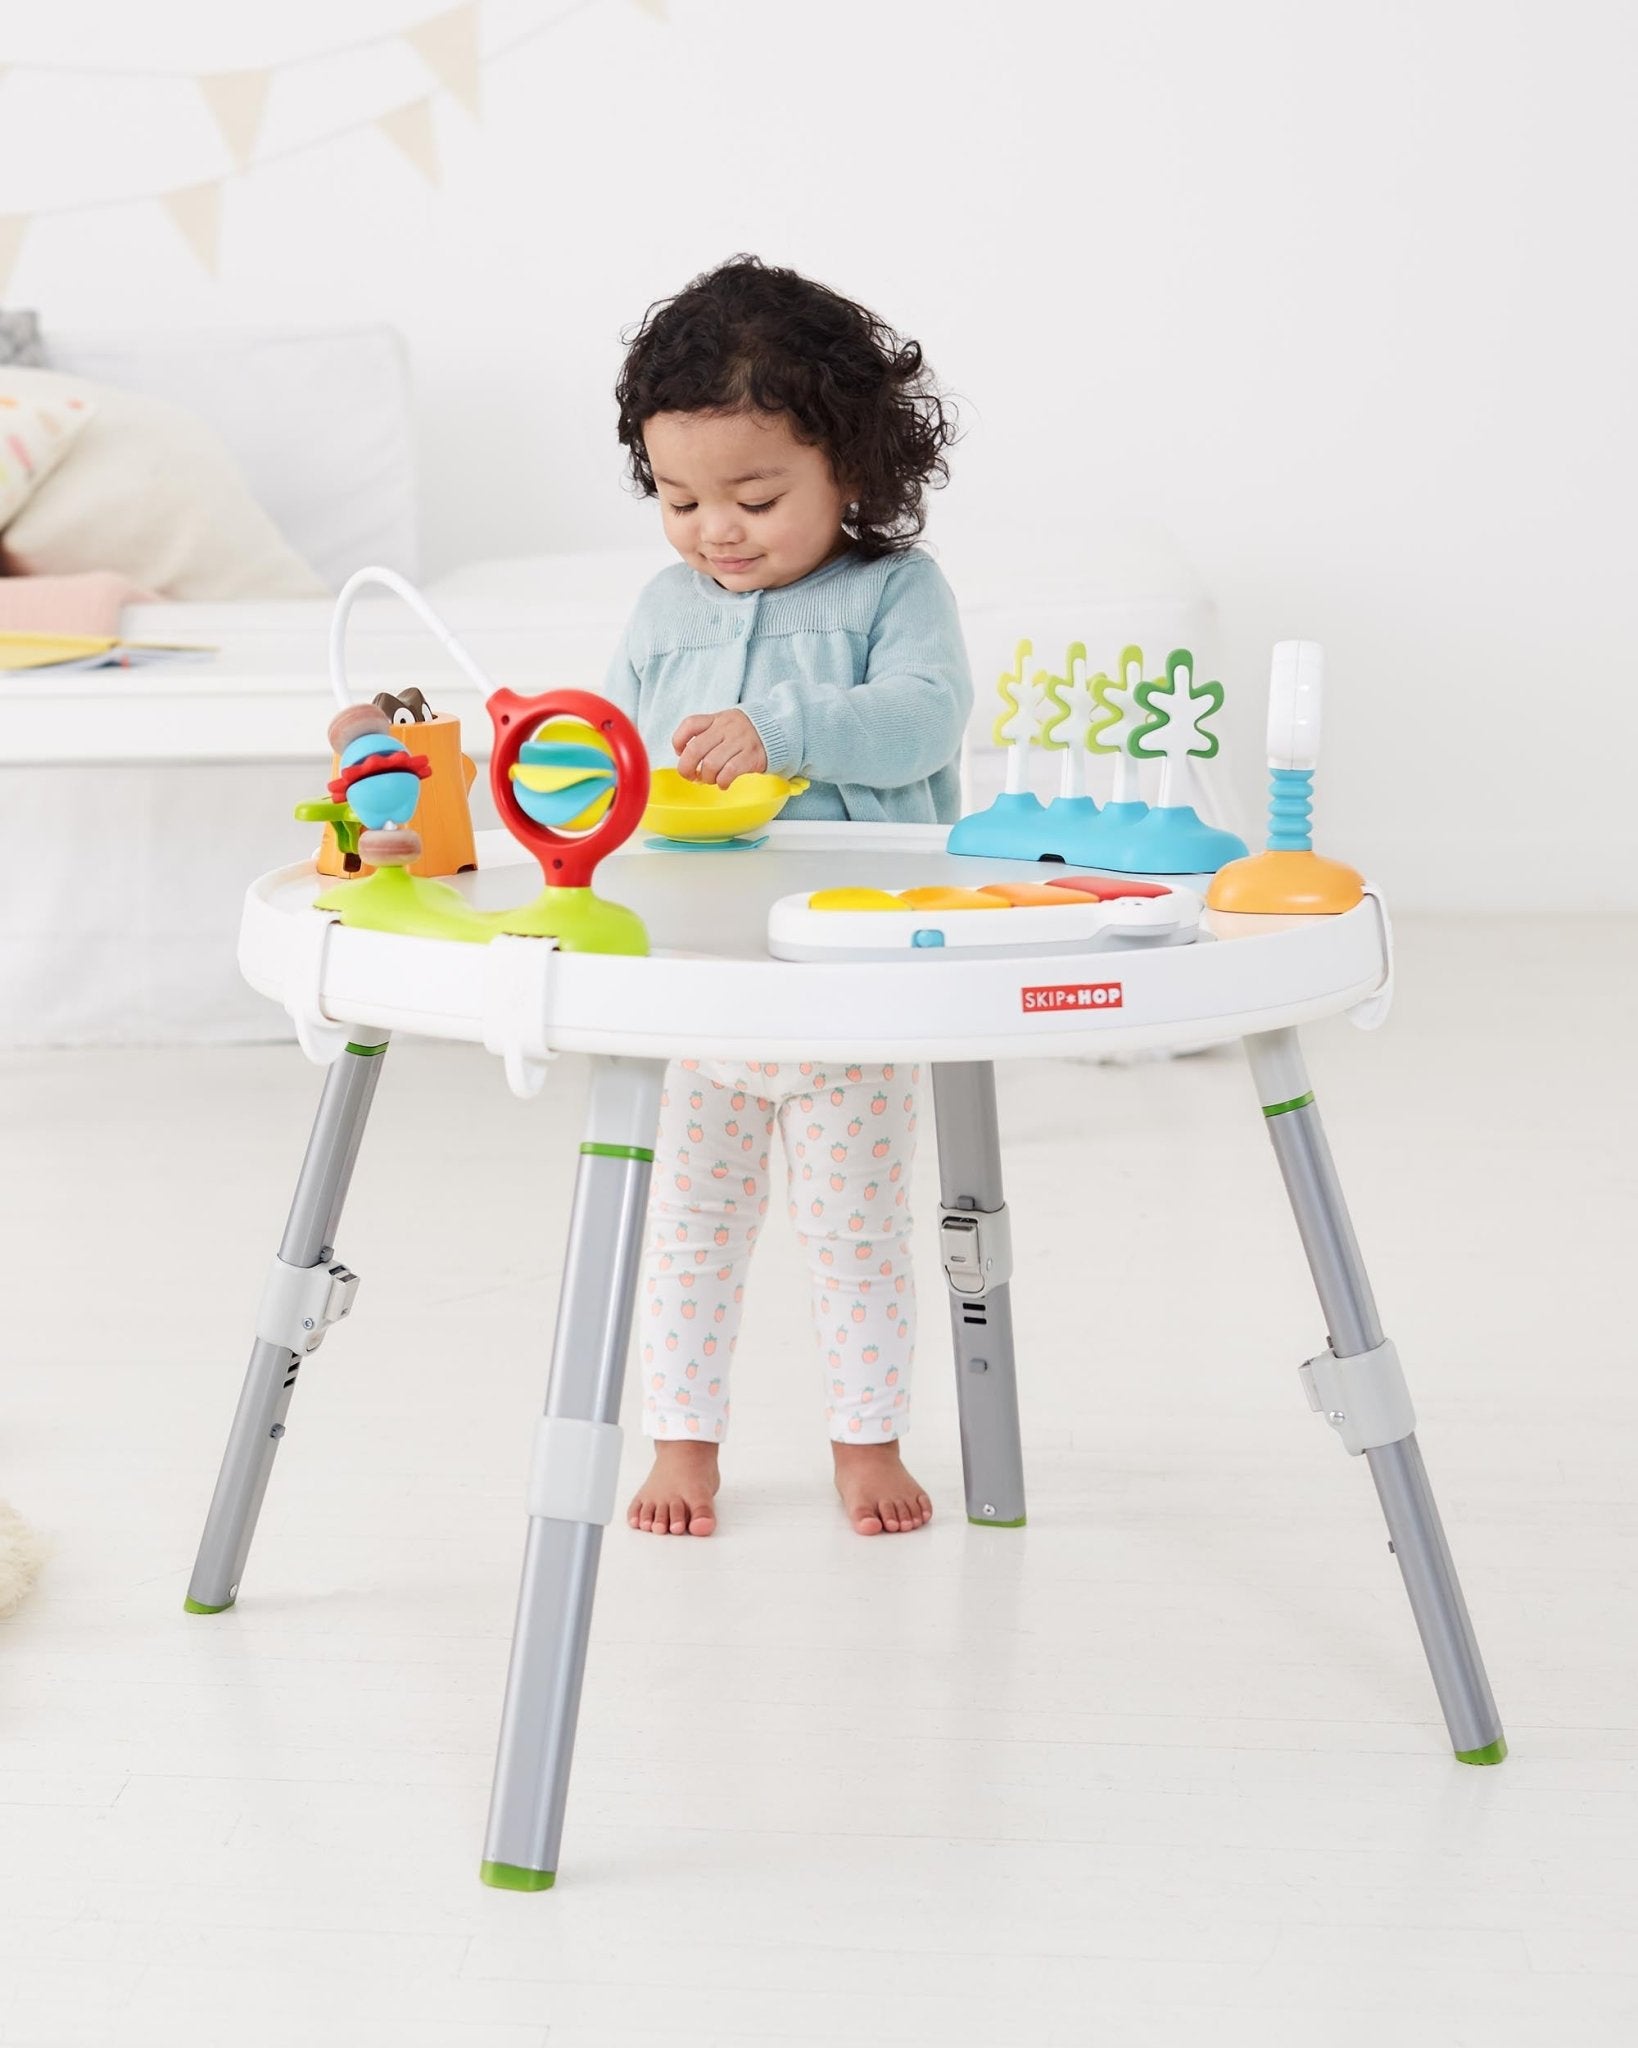 Skip Hop Baby Activity Center 3-Stage Grow-with-Me Functionality - ANB Baby -879674017207$100 - $300